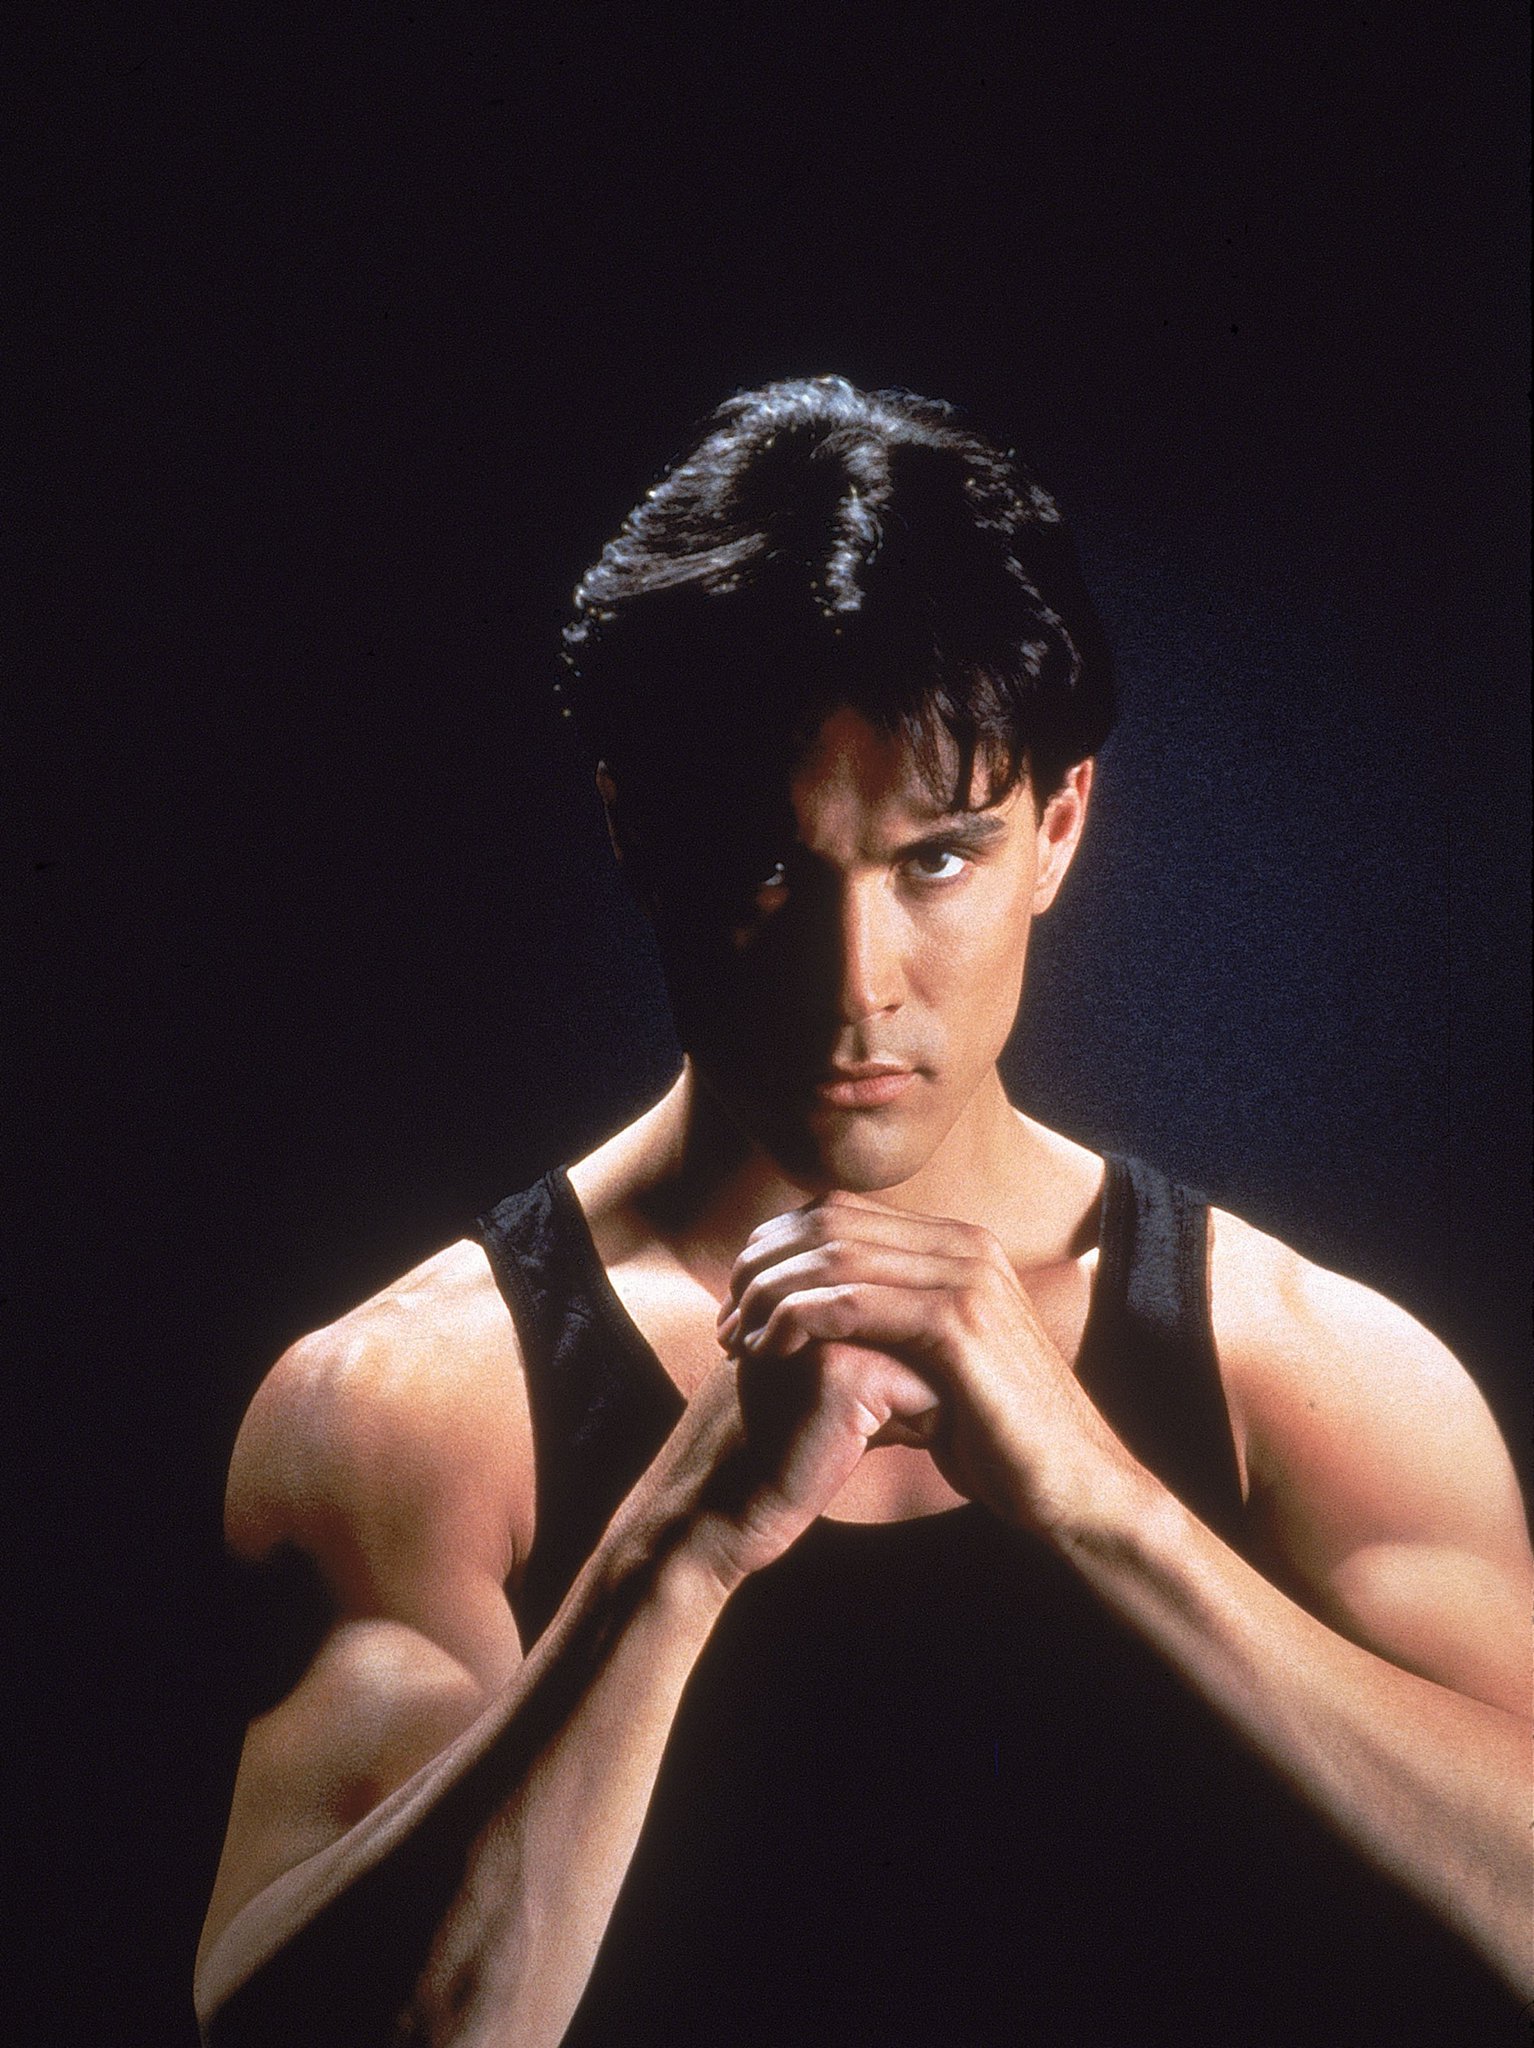 Happy Birthday, Brandon Lee. He would have been 54 years old today. RIP 